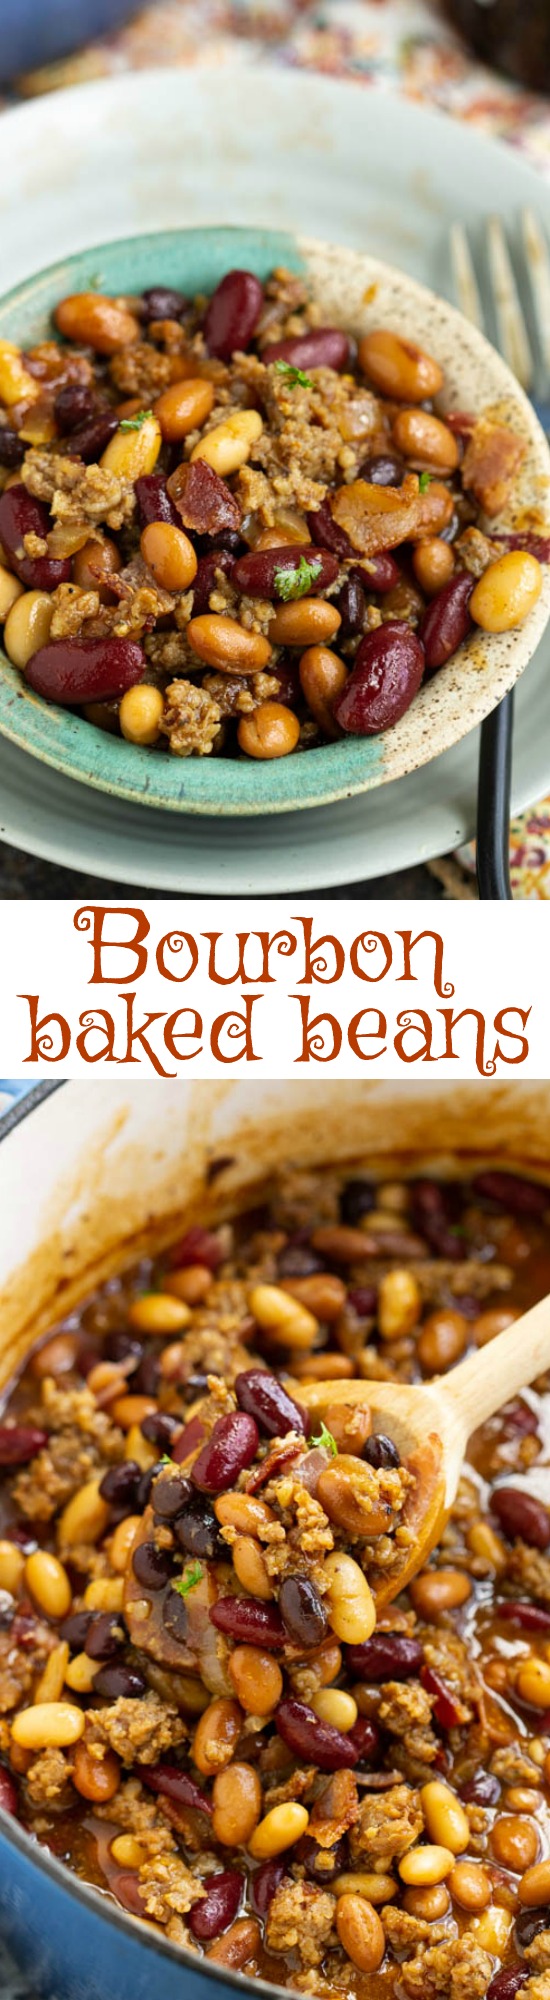 Stovetop Bourbon Bacon and Sausage Baked Beans. Hearty, flavorful, nutritious, and healthy, Stovetop Bourbon Bacon and Sausage 'Baked' Beans recipe thick and meaty. They make the perfect complement to your game day table, potluck, or barbecue all year.